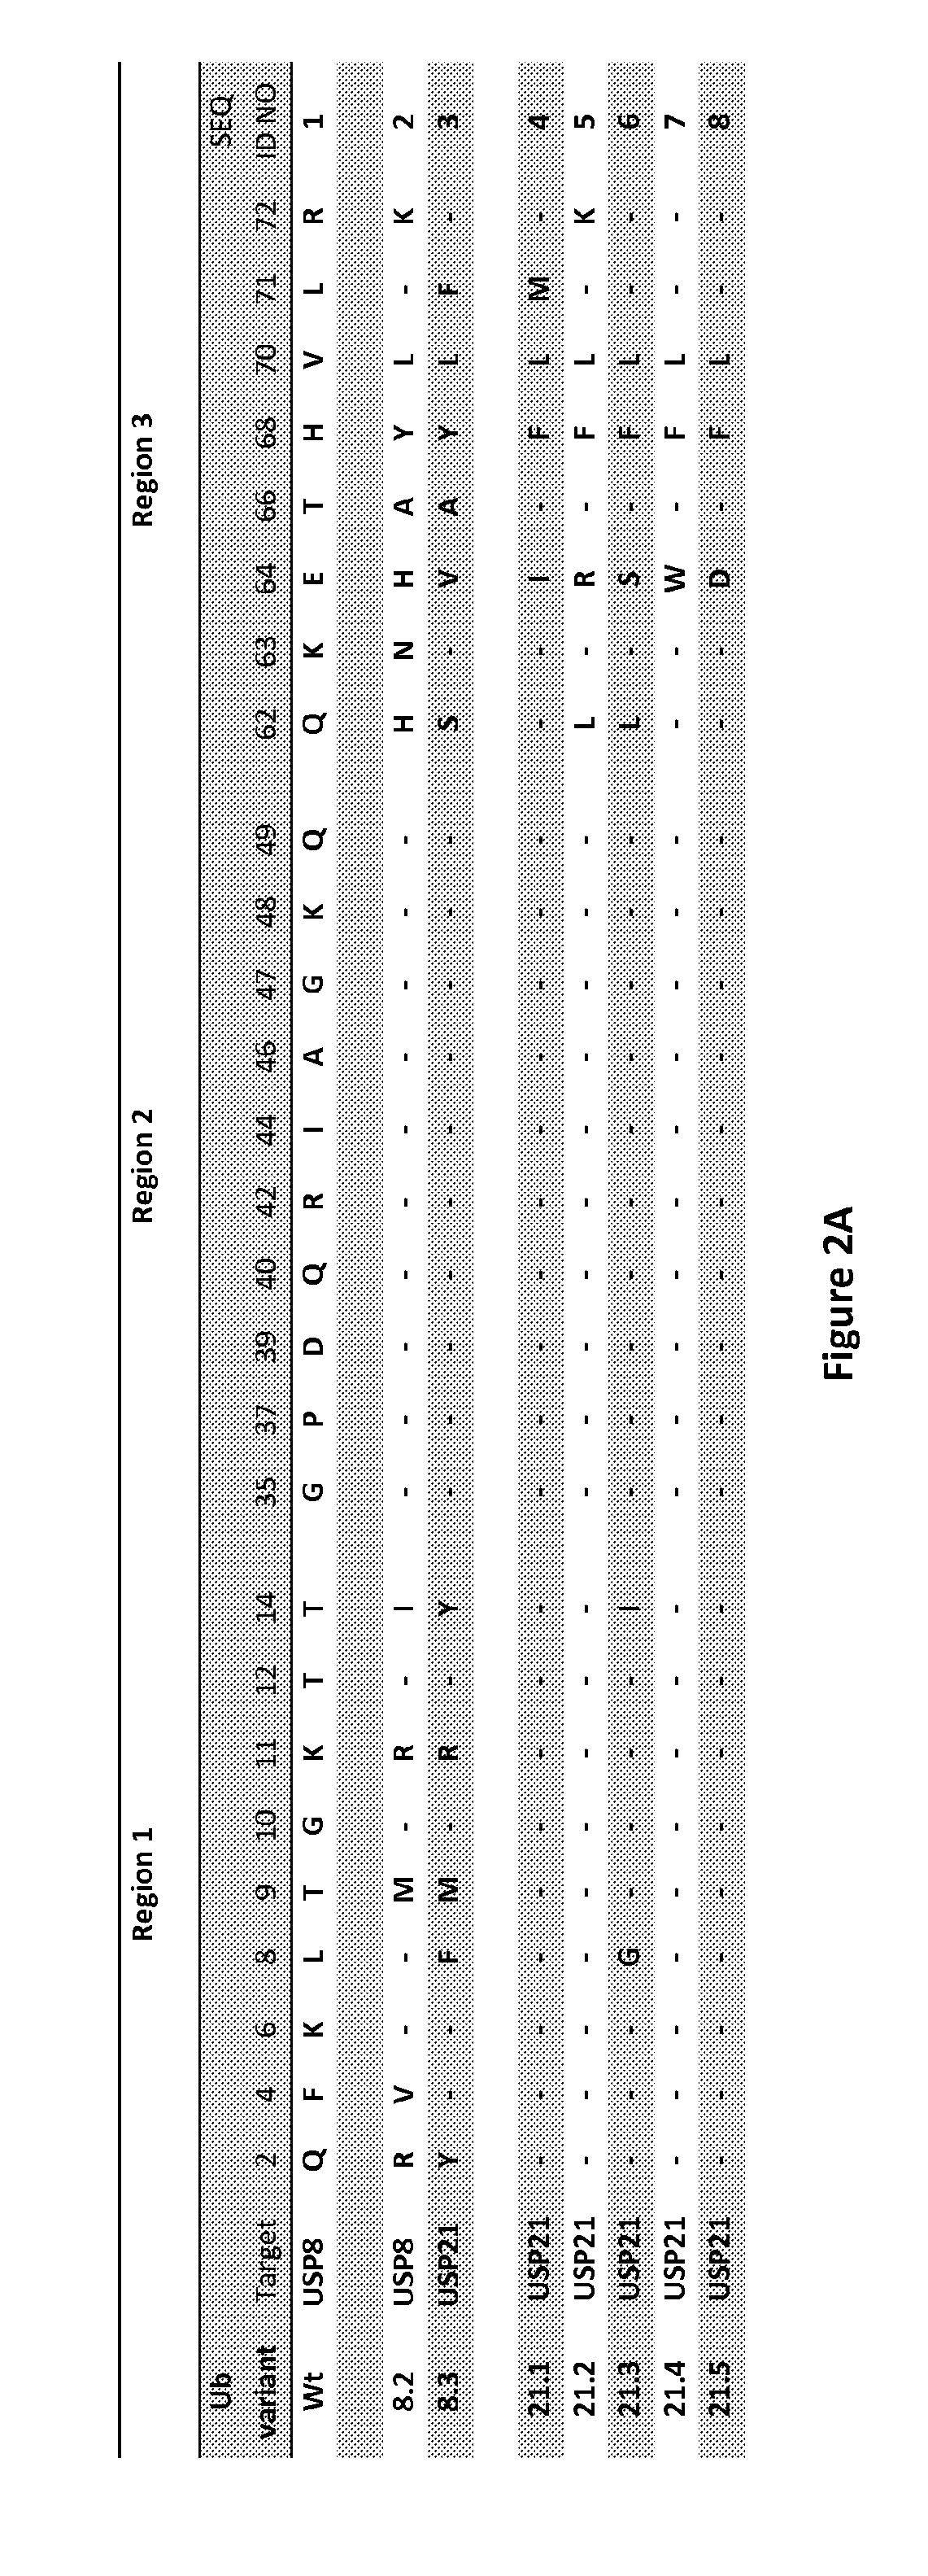 Specific active site inhibitors of enzymes and methods of producing same